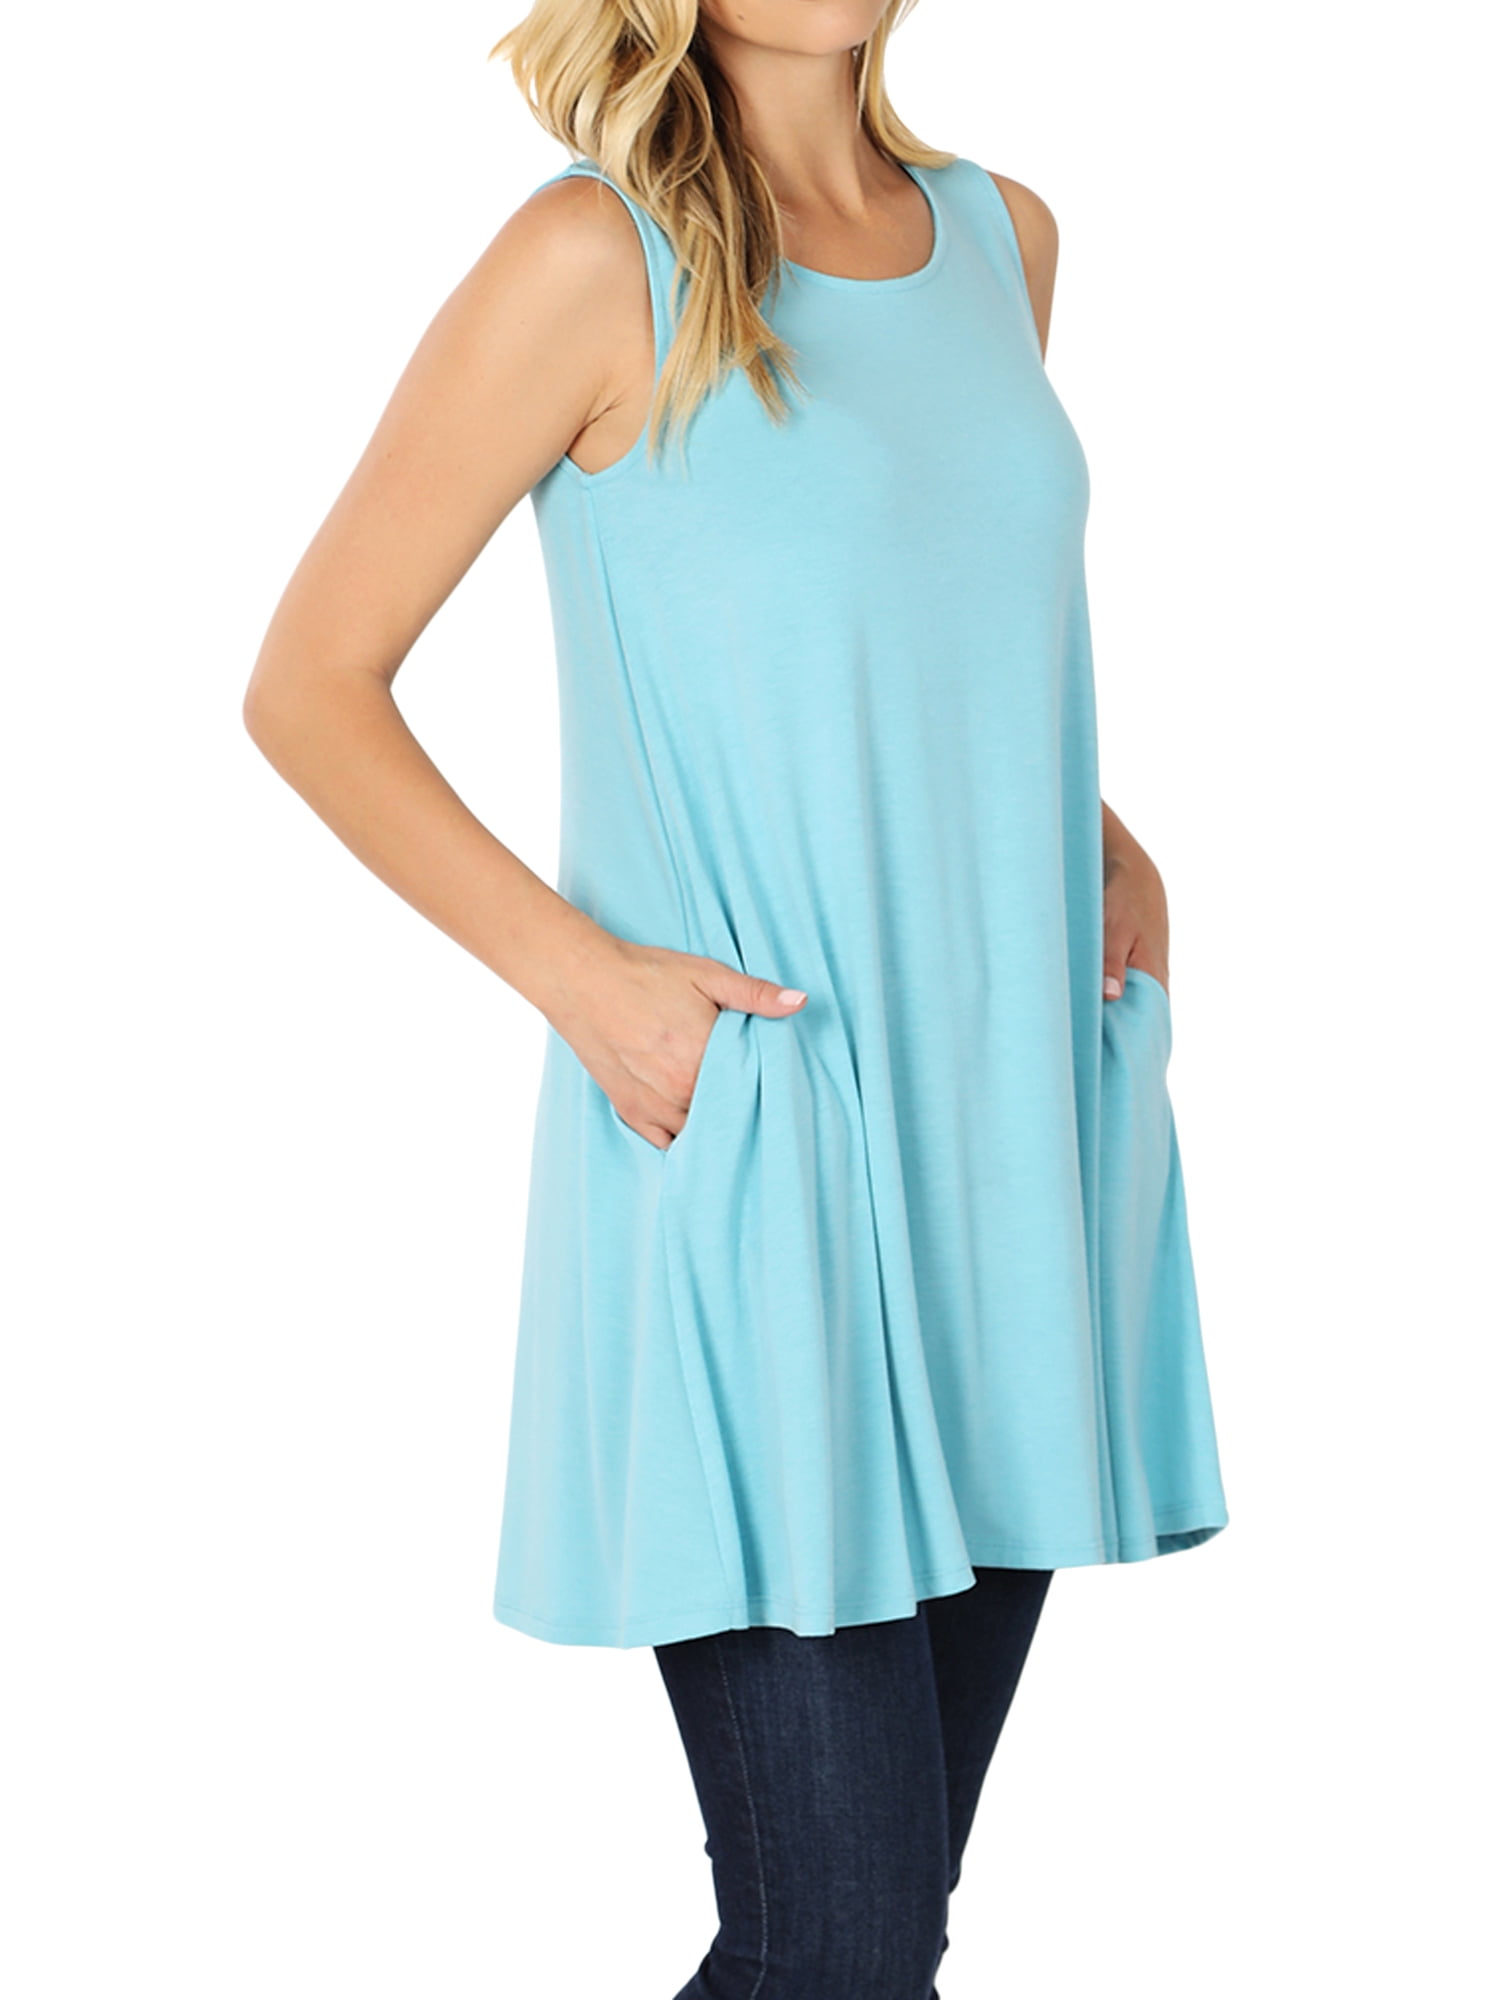 TheLovely - Women Round Neck Sleeveless Flowy Tunic Top with Side ...